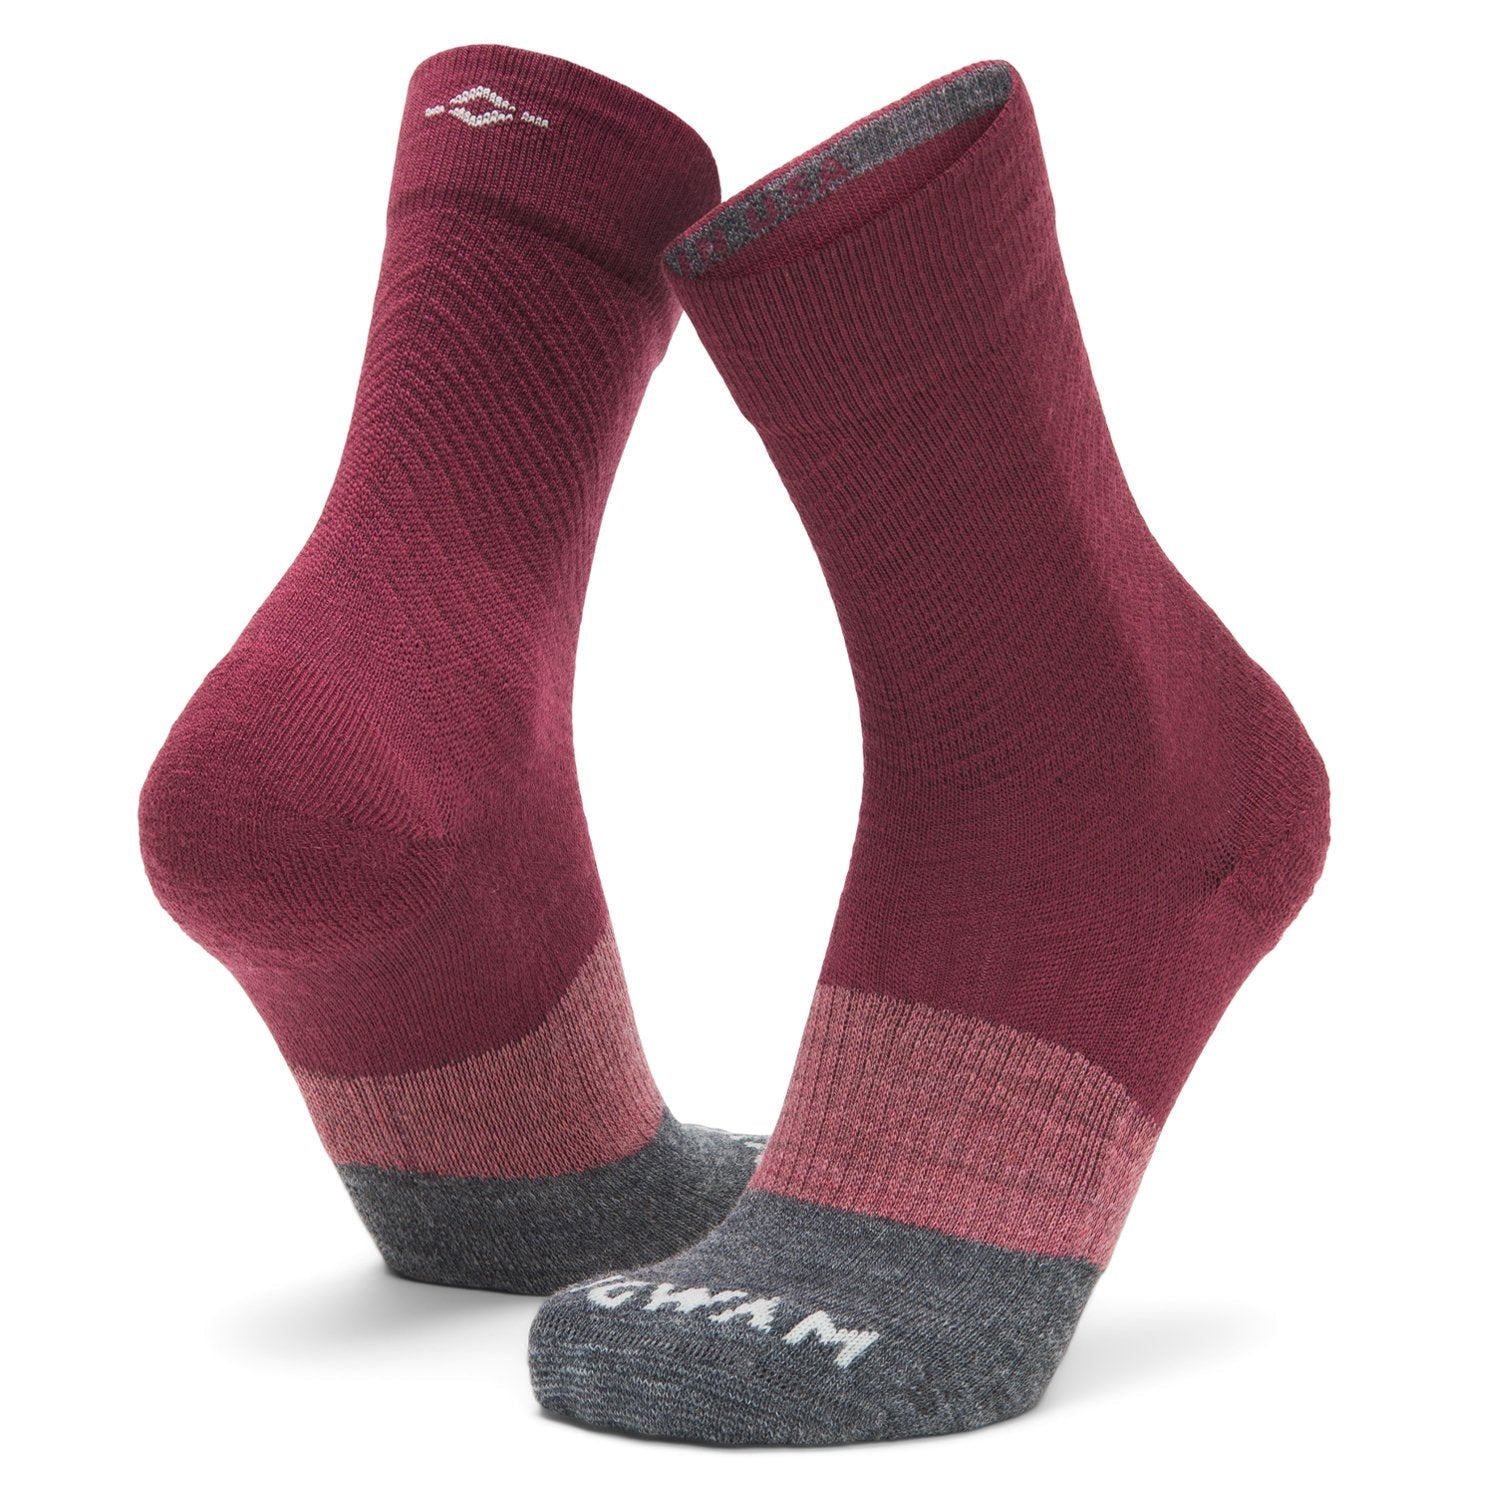 Trail Junkie Lightweight Mid Crew Sock With Merino Wool - Rhododendron full product perspective - made in The USA Wigwam Socks